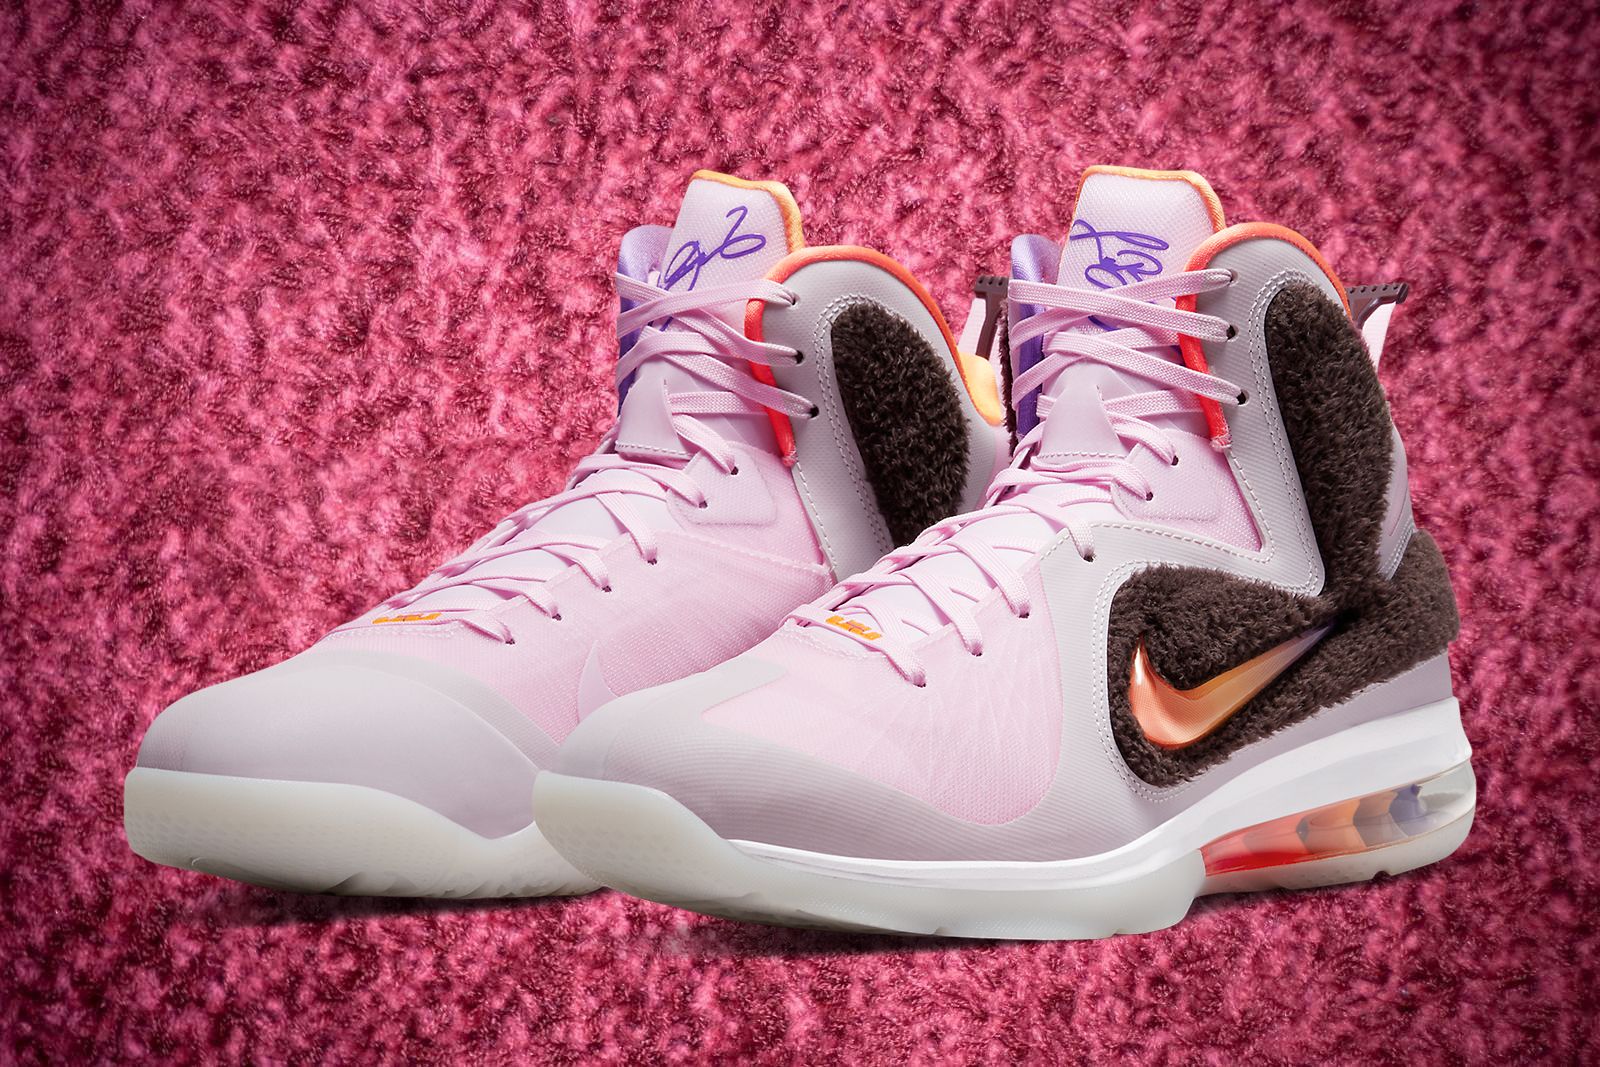 Nike LeBron 9 to Release in Fuzzy and Funky 'Regal Pink' Colourway - Craig  Green x adidas Graddfa AKH White - Sb-roscoffShops